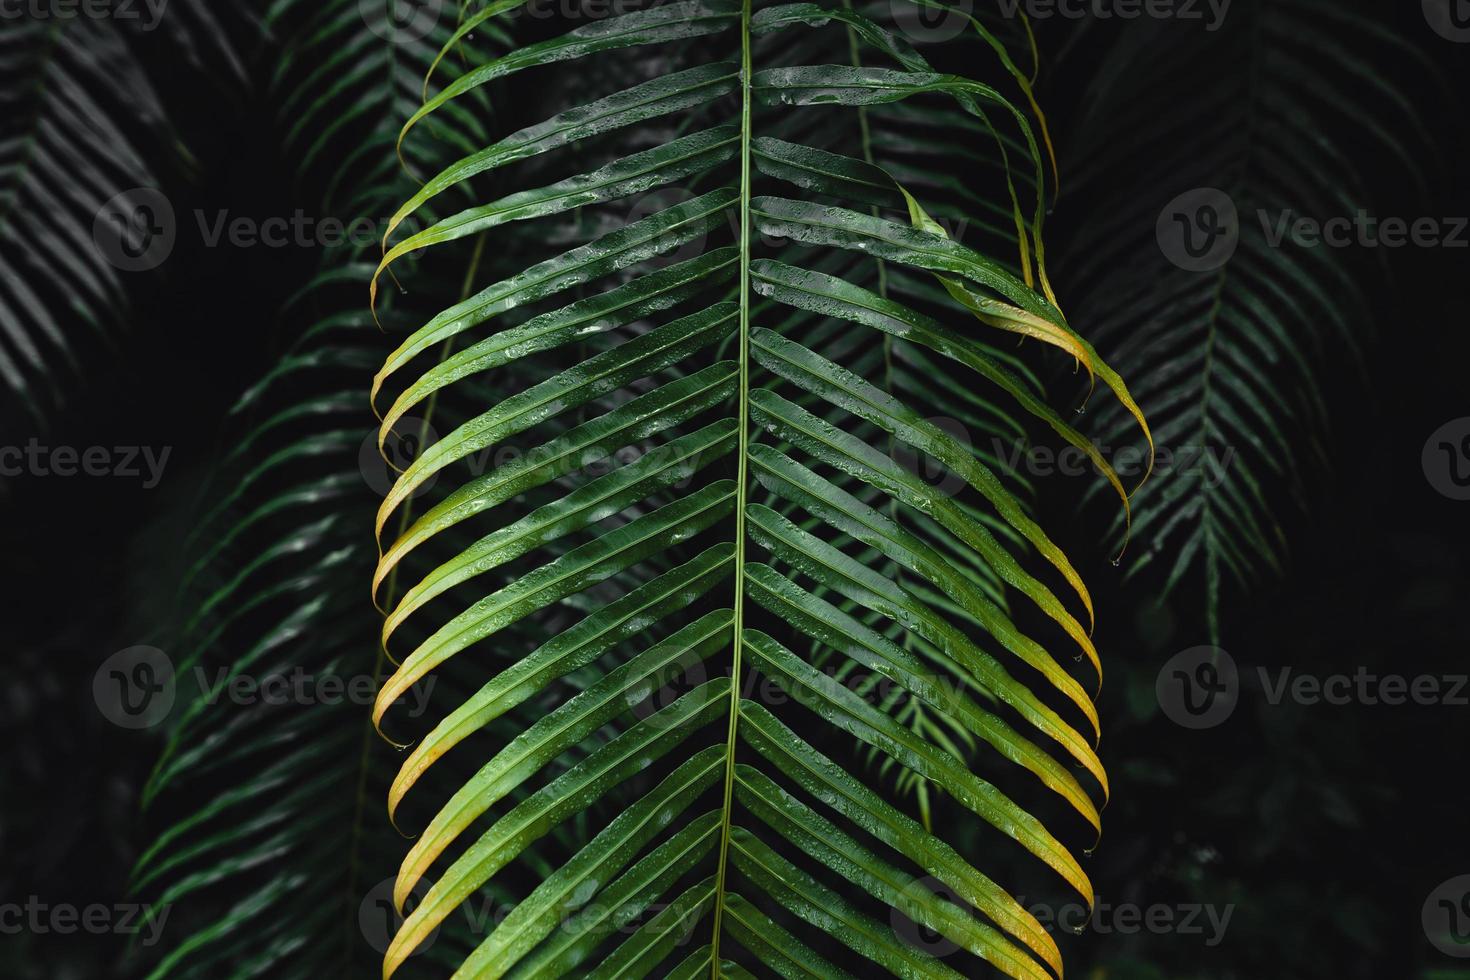 Close-Up Of  Dark green leaves photo